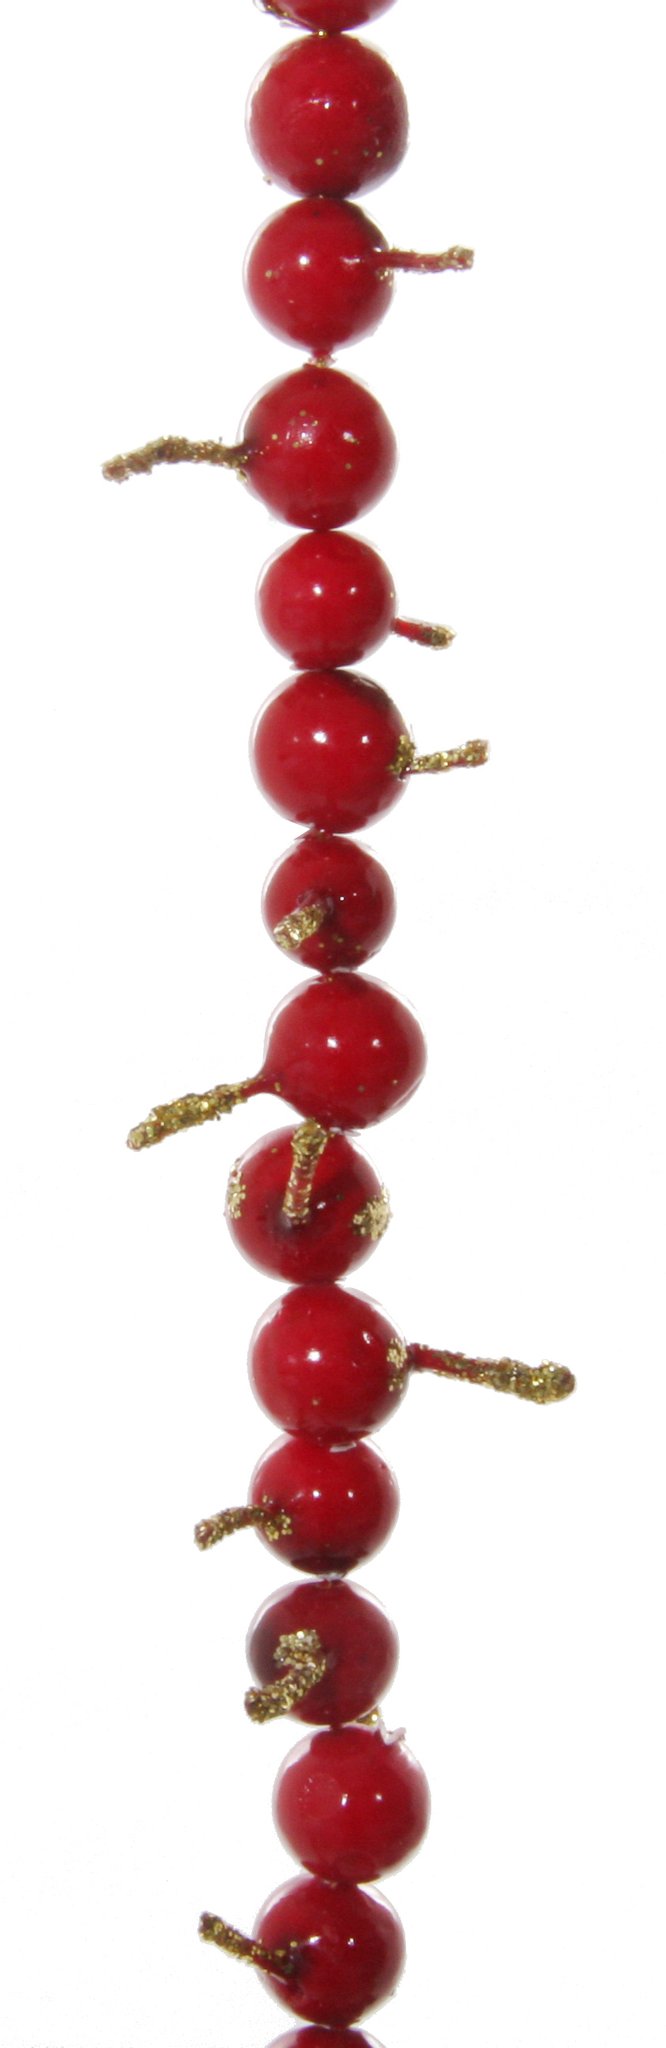 shishi-red-and-gold-glittered-berries-garland-100cm